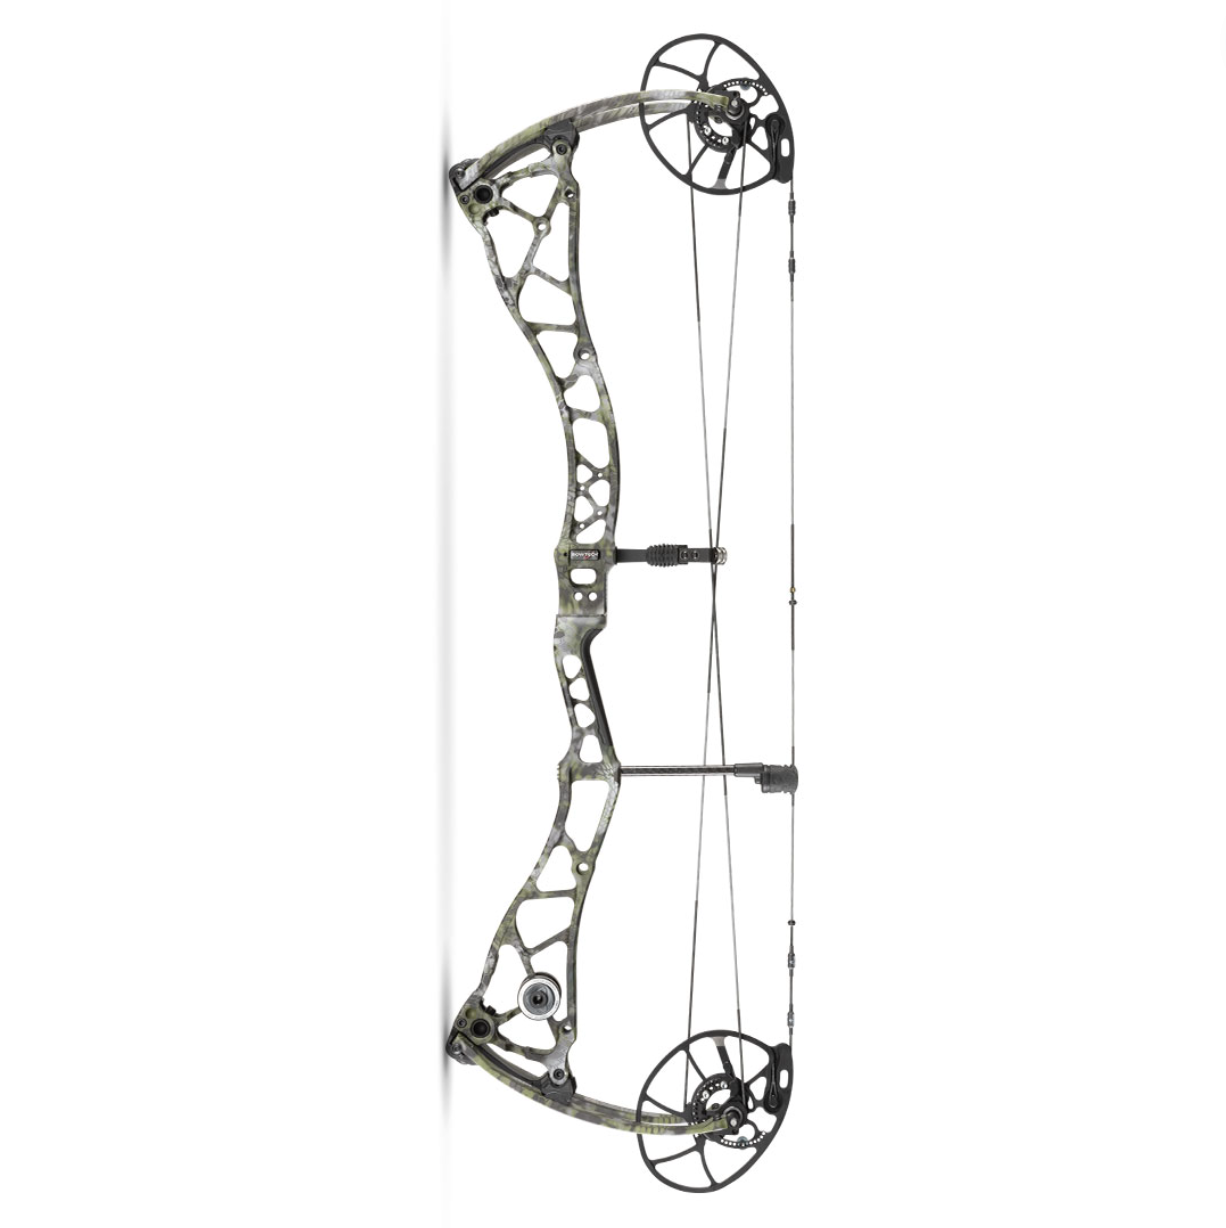 Bowtech SX80 Compound Hunting Bow